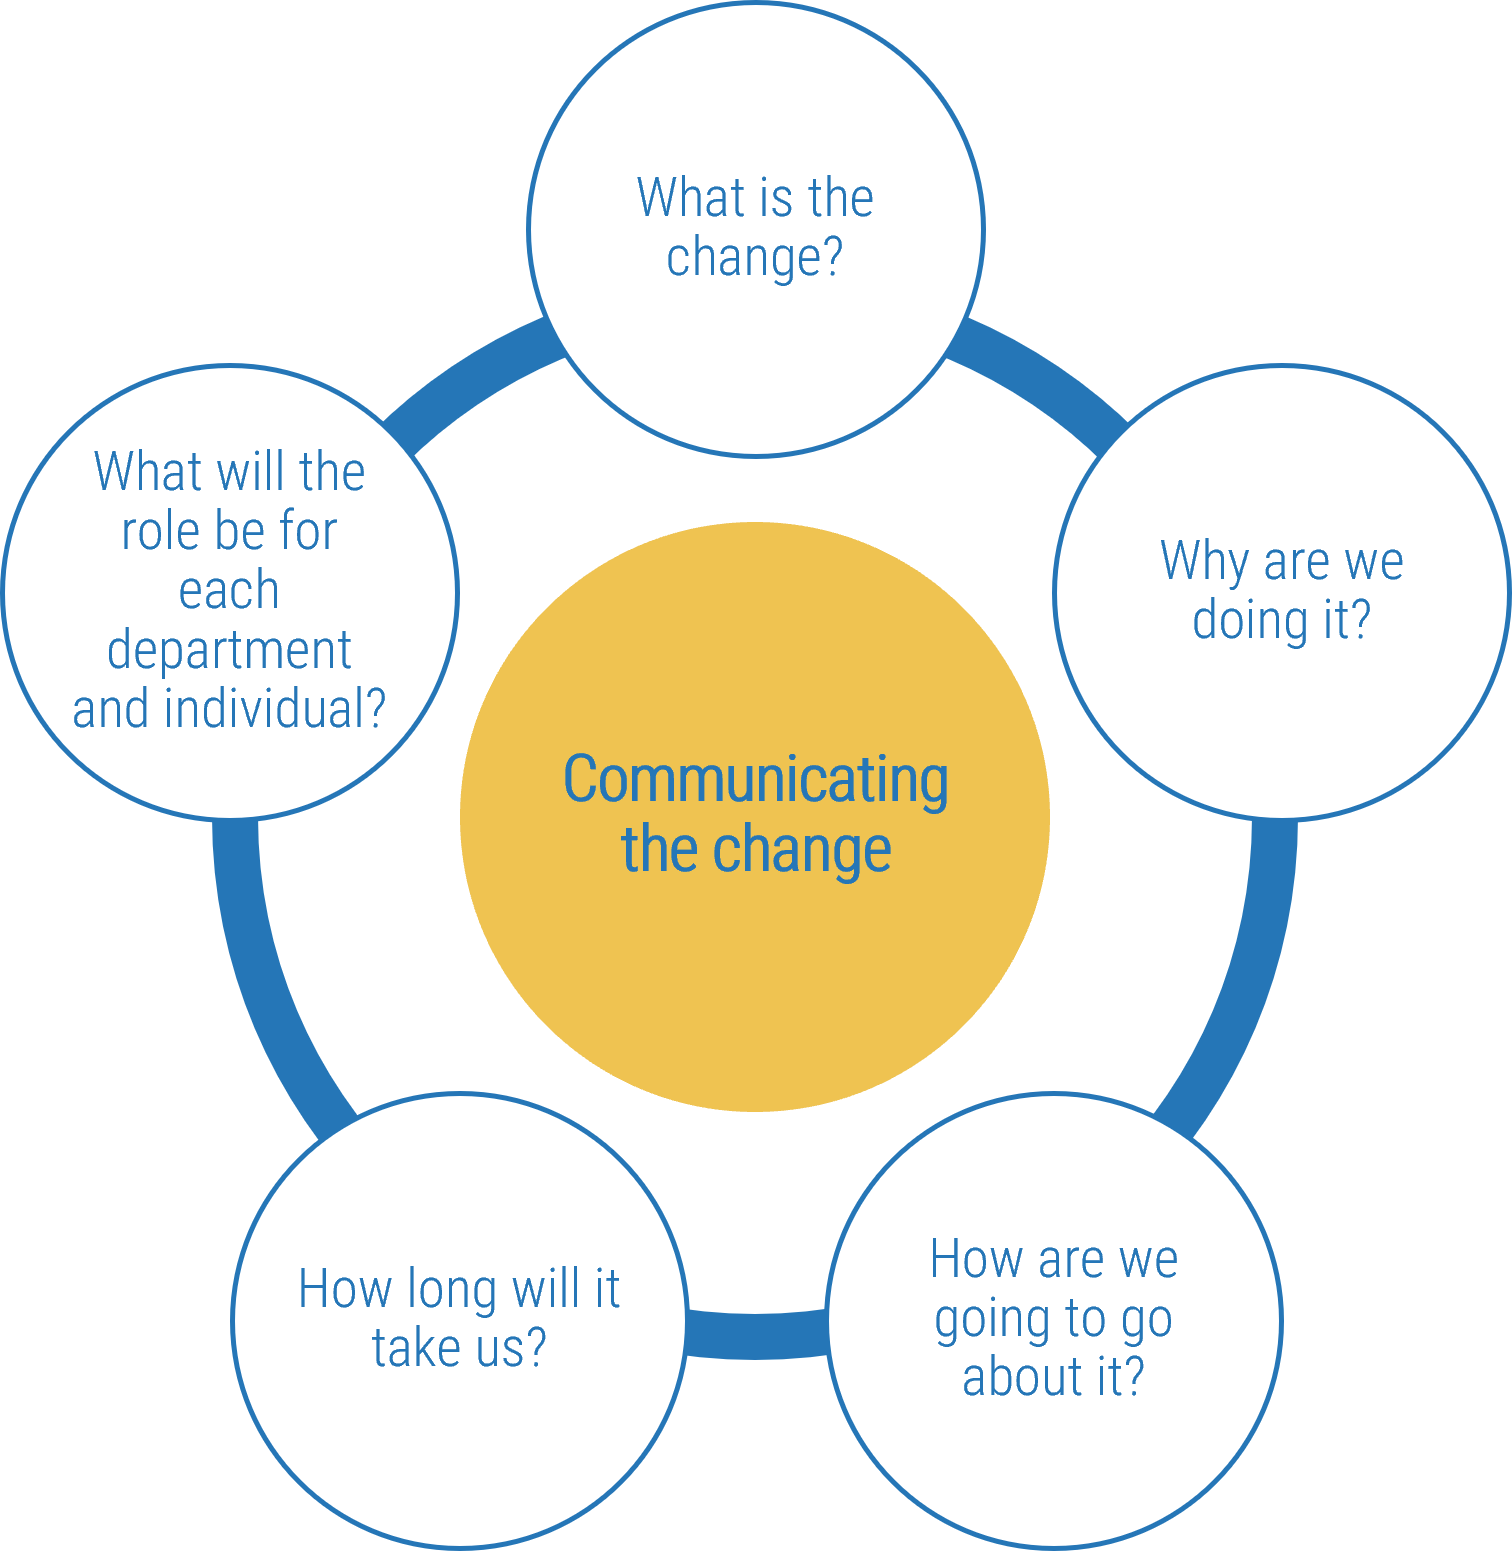 An image of a cycle, including the five elements for communicating the reason for change.  these include: What will the role be for each department and individual?; What is the change?; Why are we doing it?; How are we going to go about it?; How long will it take us?